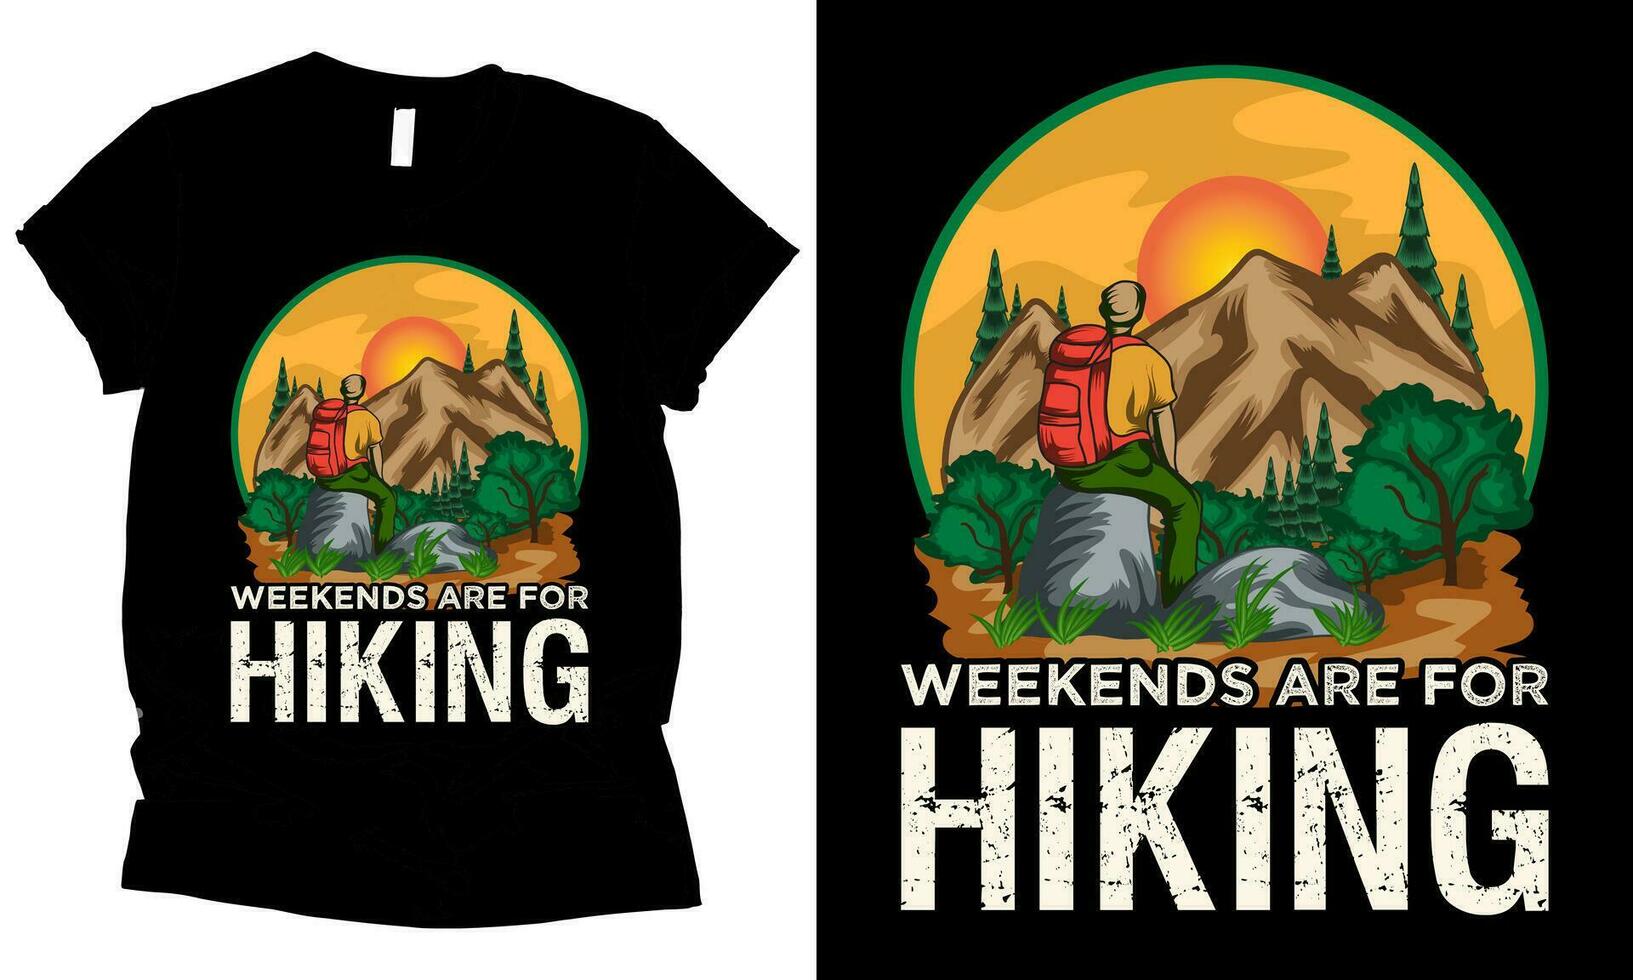 weekends are for hiking, outdoor adventure t-shirt design vector